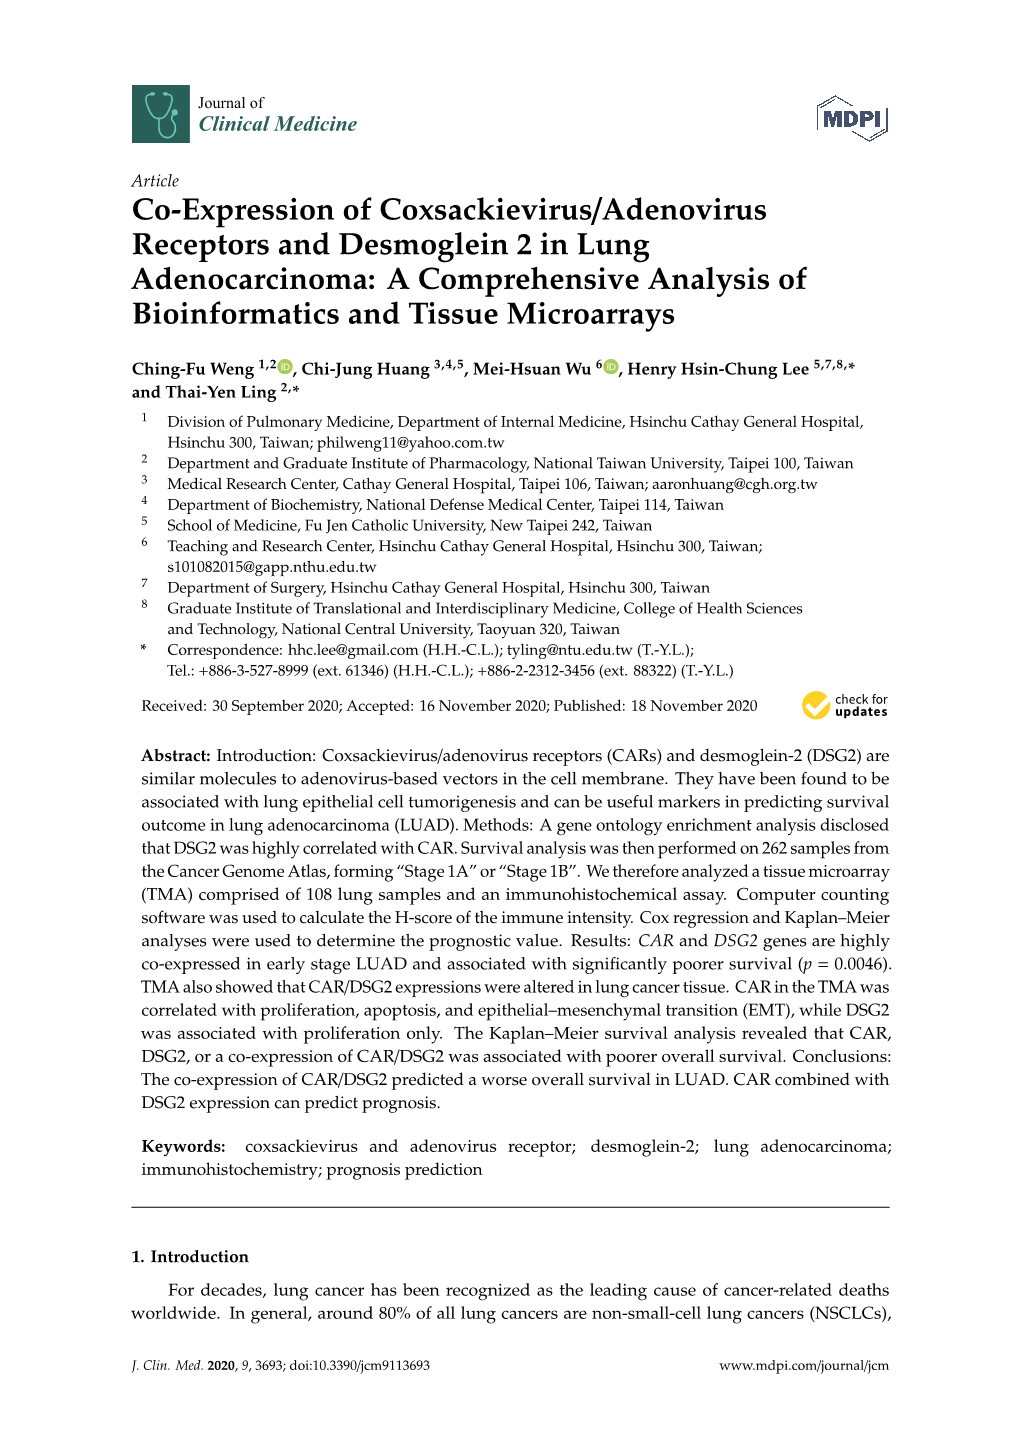 Co-Expression of Coxsackievirus/Adenovirus Receptors and Desmoglein 2 in Lung Adenocarcinoma: a Comprehensive Analysis of Bioinformatics and Tissue Microarrays